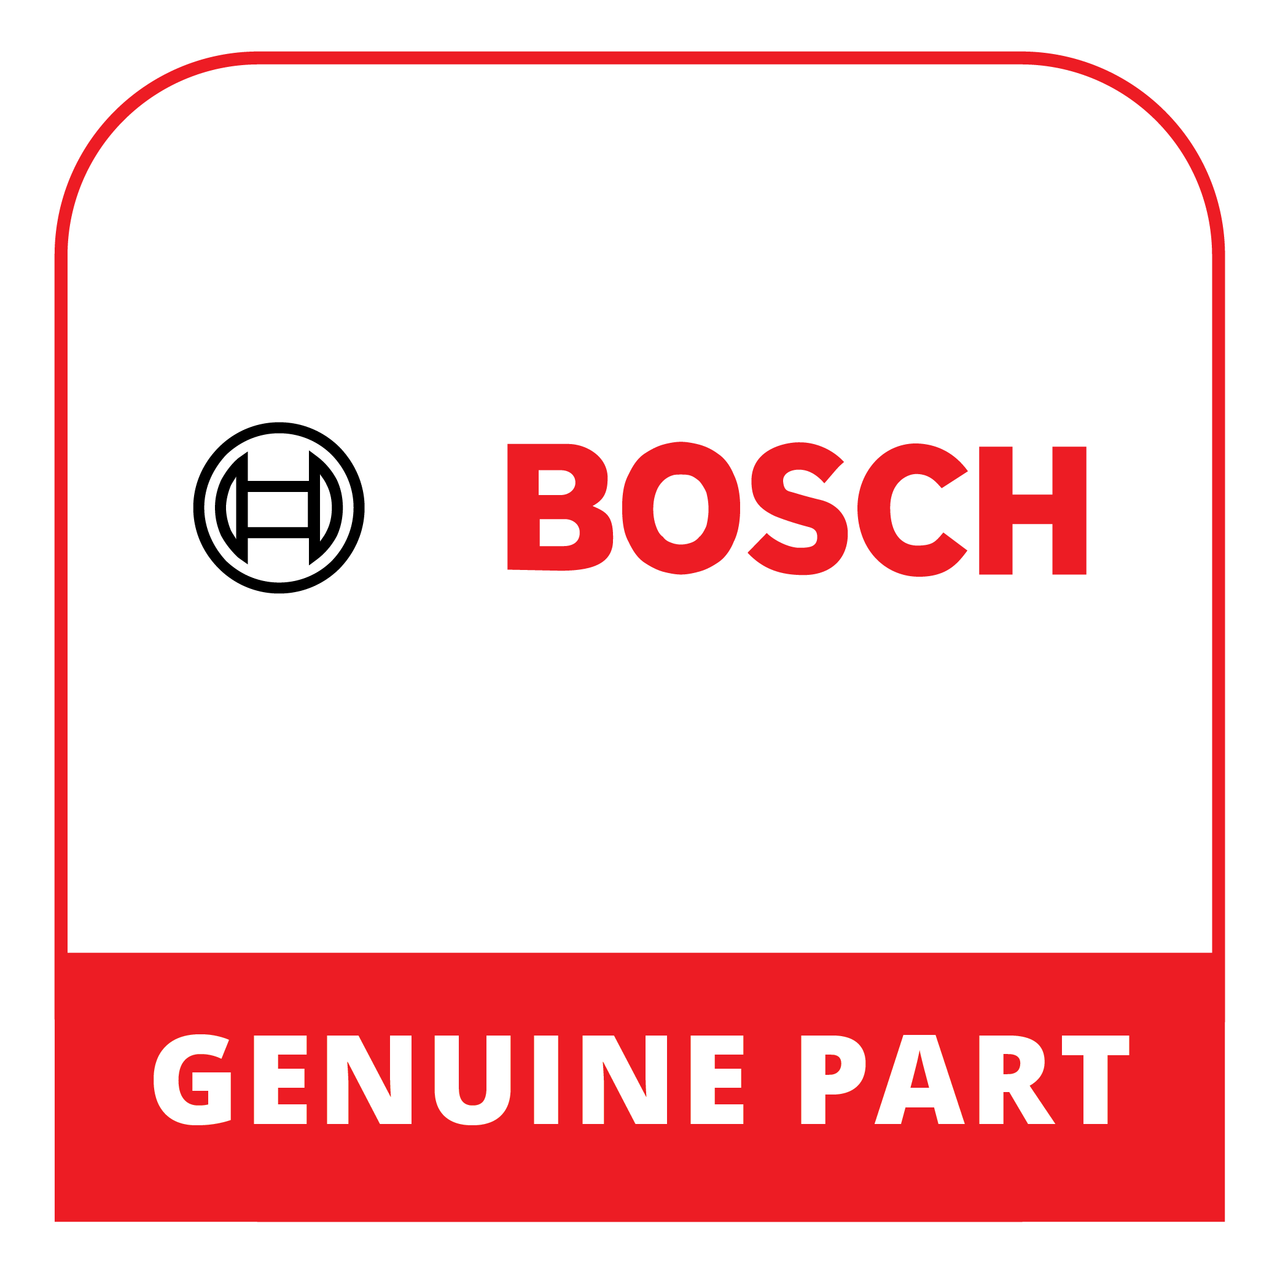 Bosch (Thermador) 12026746 - Control Module Programmed - Genuine Bosch (Thermador) Part